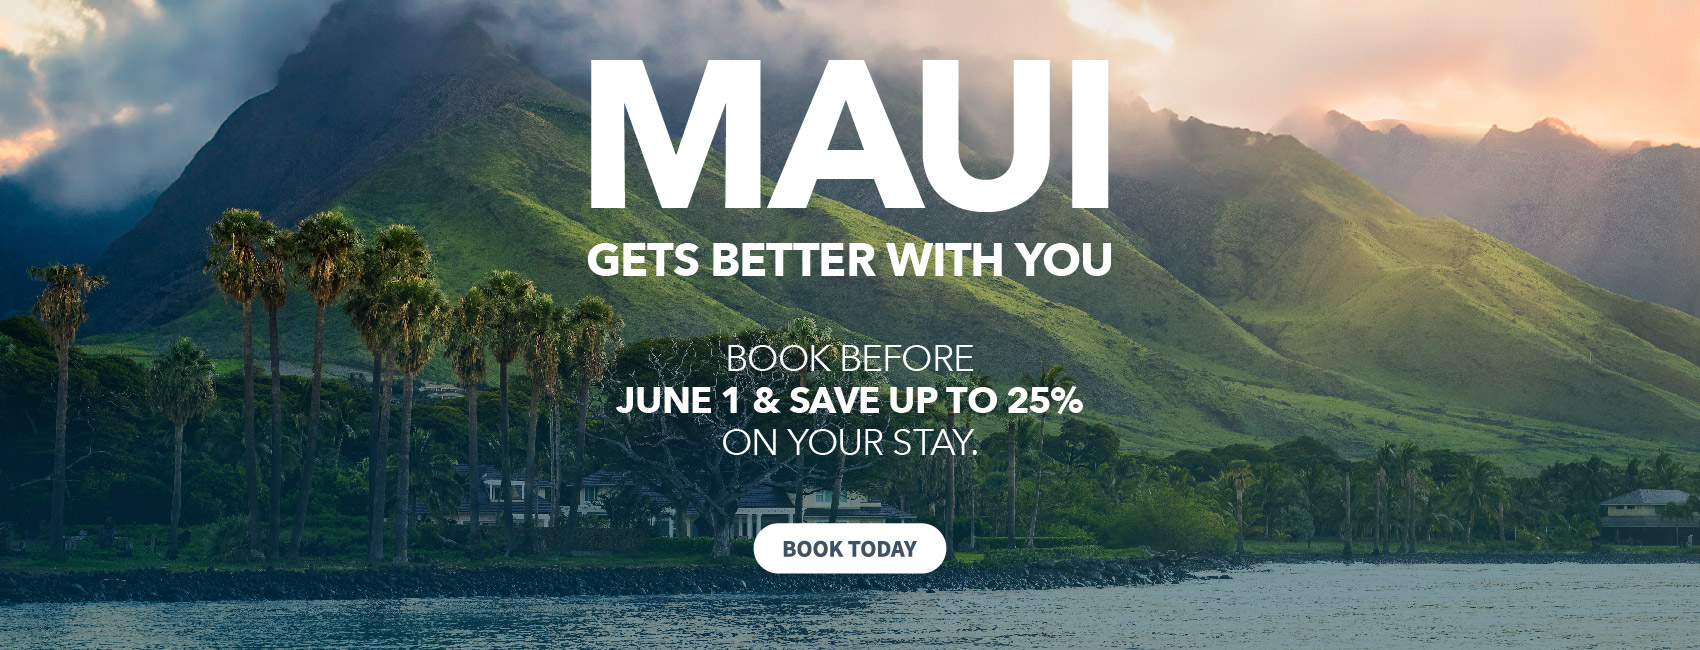 Maui Gets Better With You. Book before May 16th and save up to 25% on your stay. Book Today.